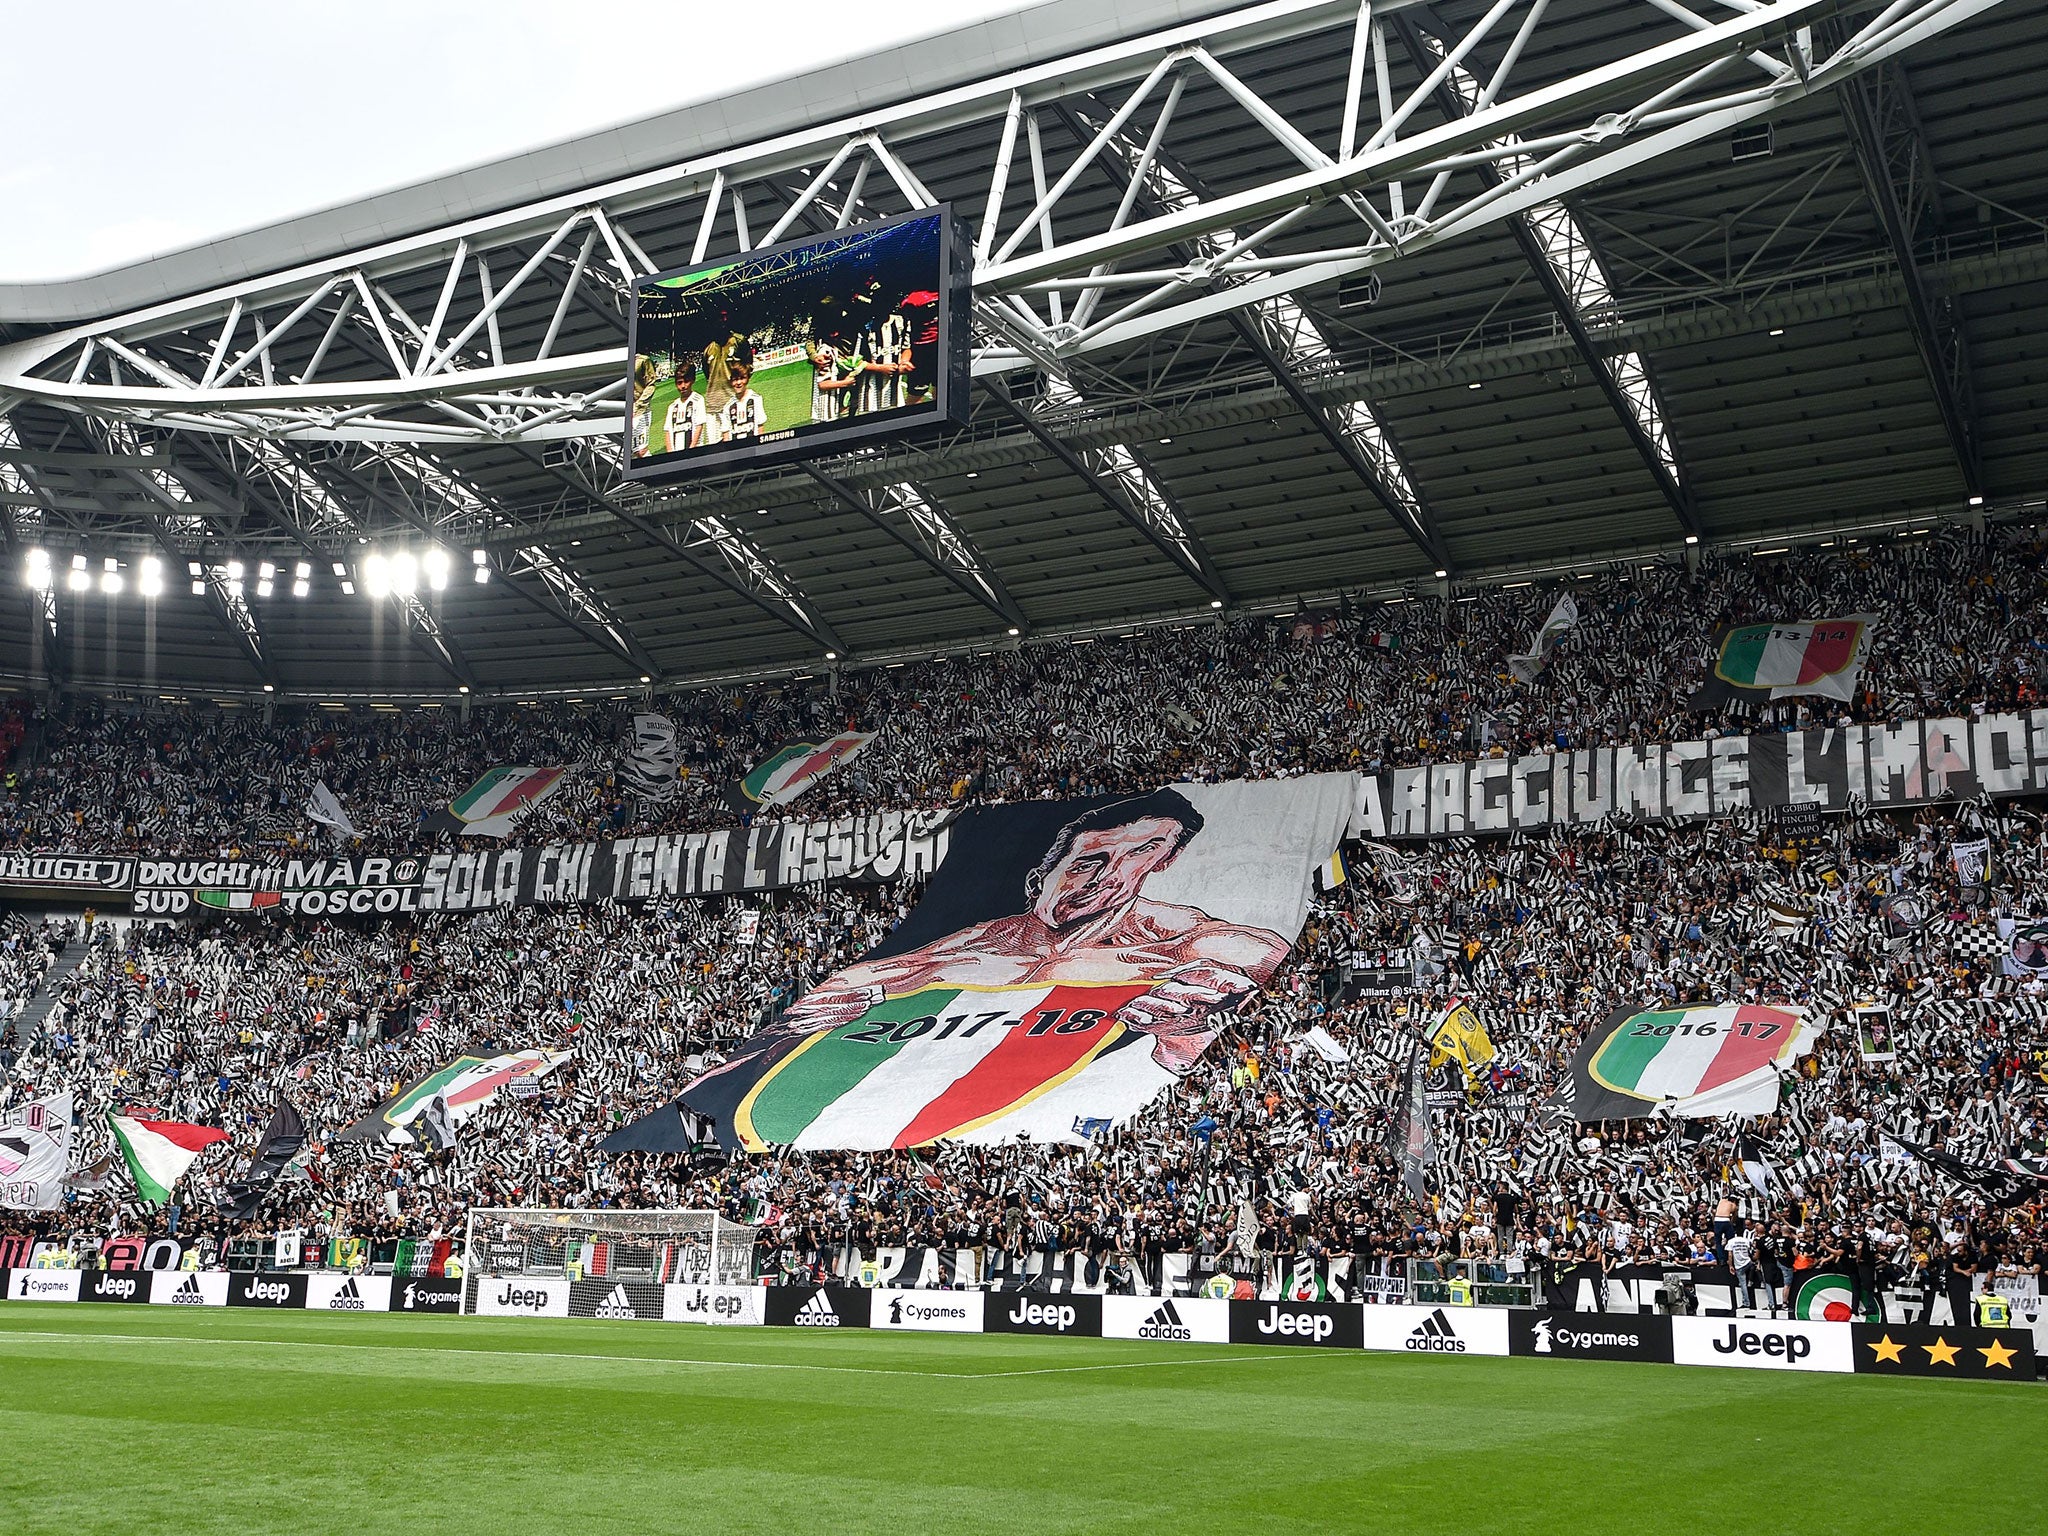 Many Juventus Ultras have become disillusioned with the Turin club